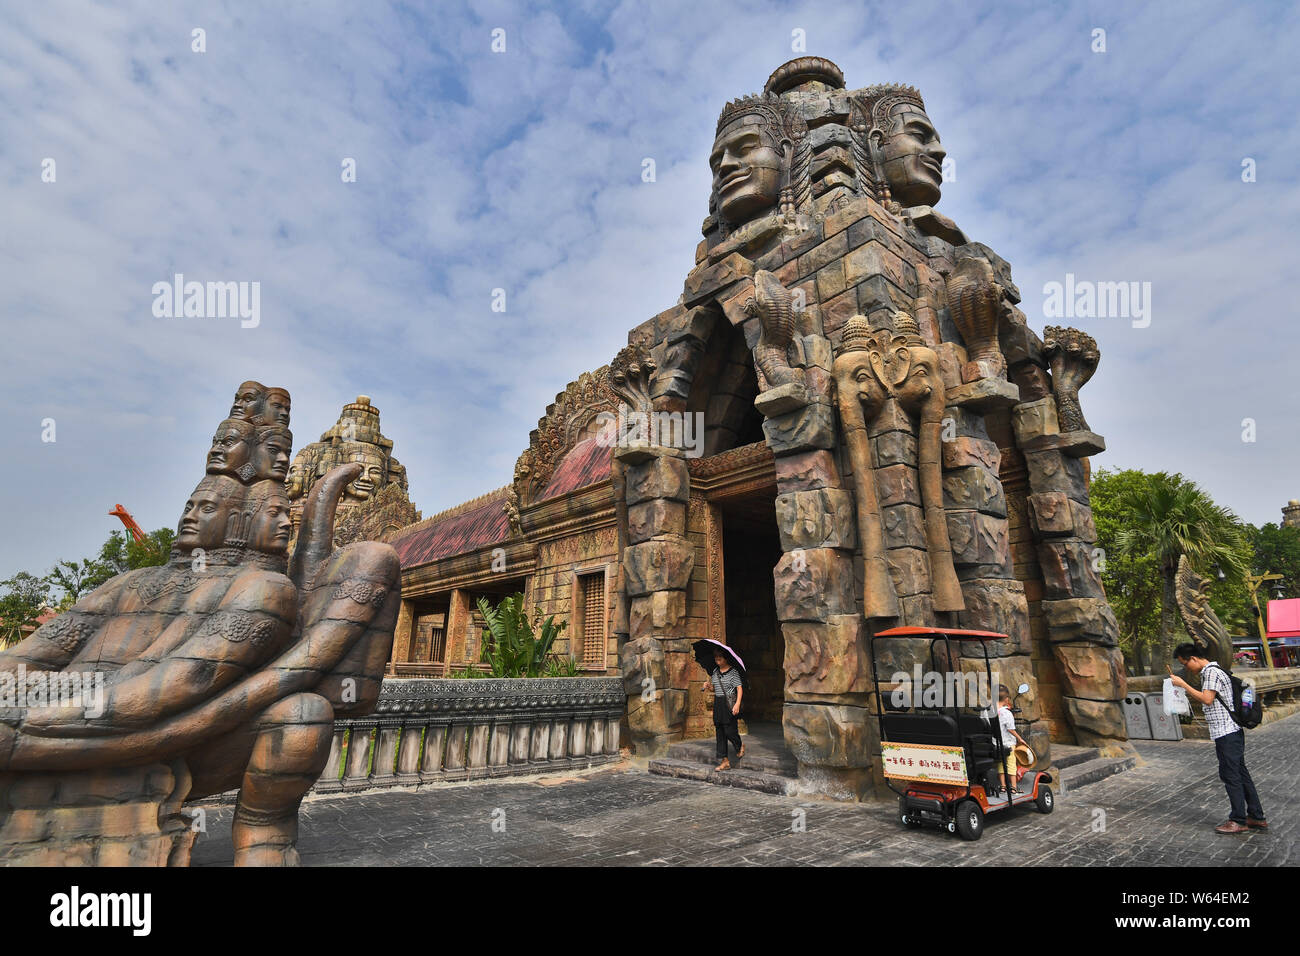 Tourists visit a replica of Cambodia's Angkor Wat temple complex at a tourist attraction in Nanning city, south China's Guangxi Zhuang Autonomous Regi Stock Photo